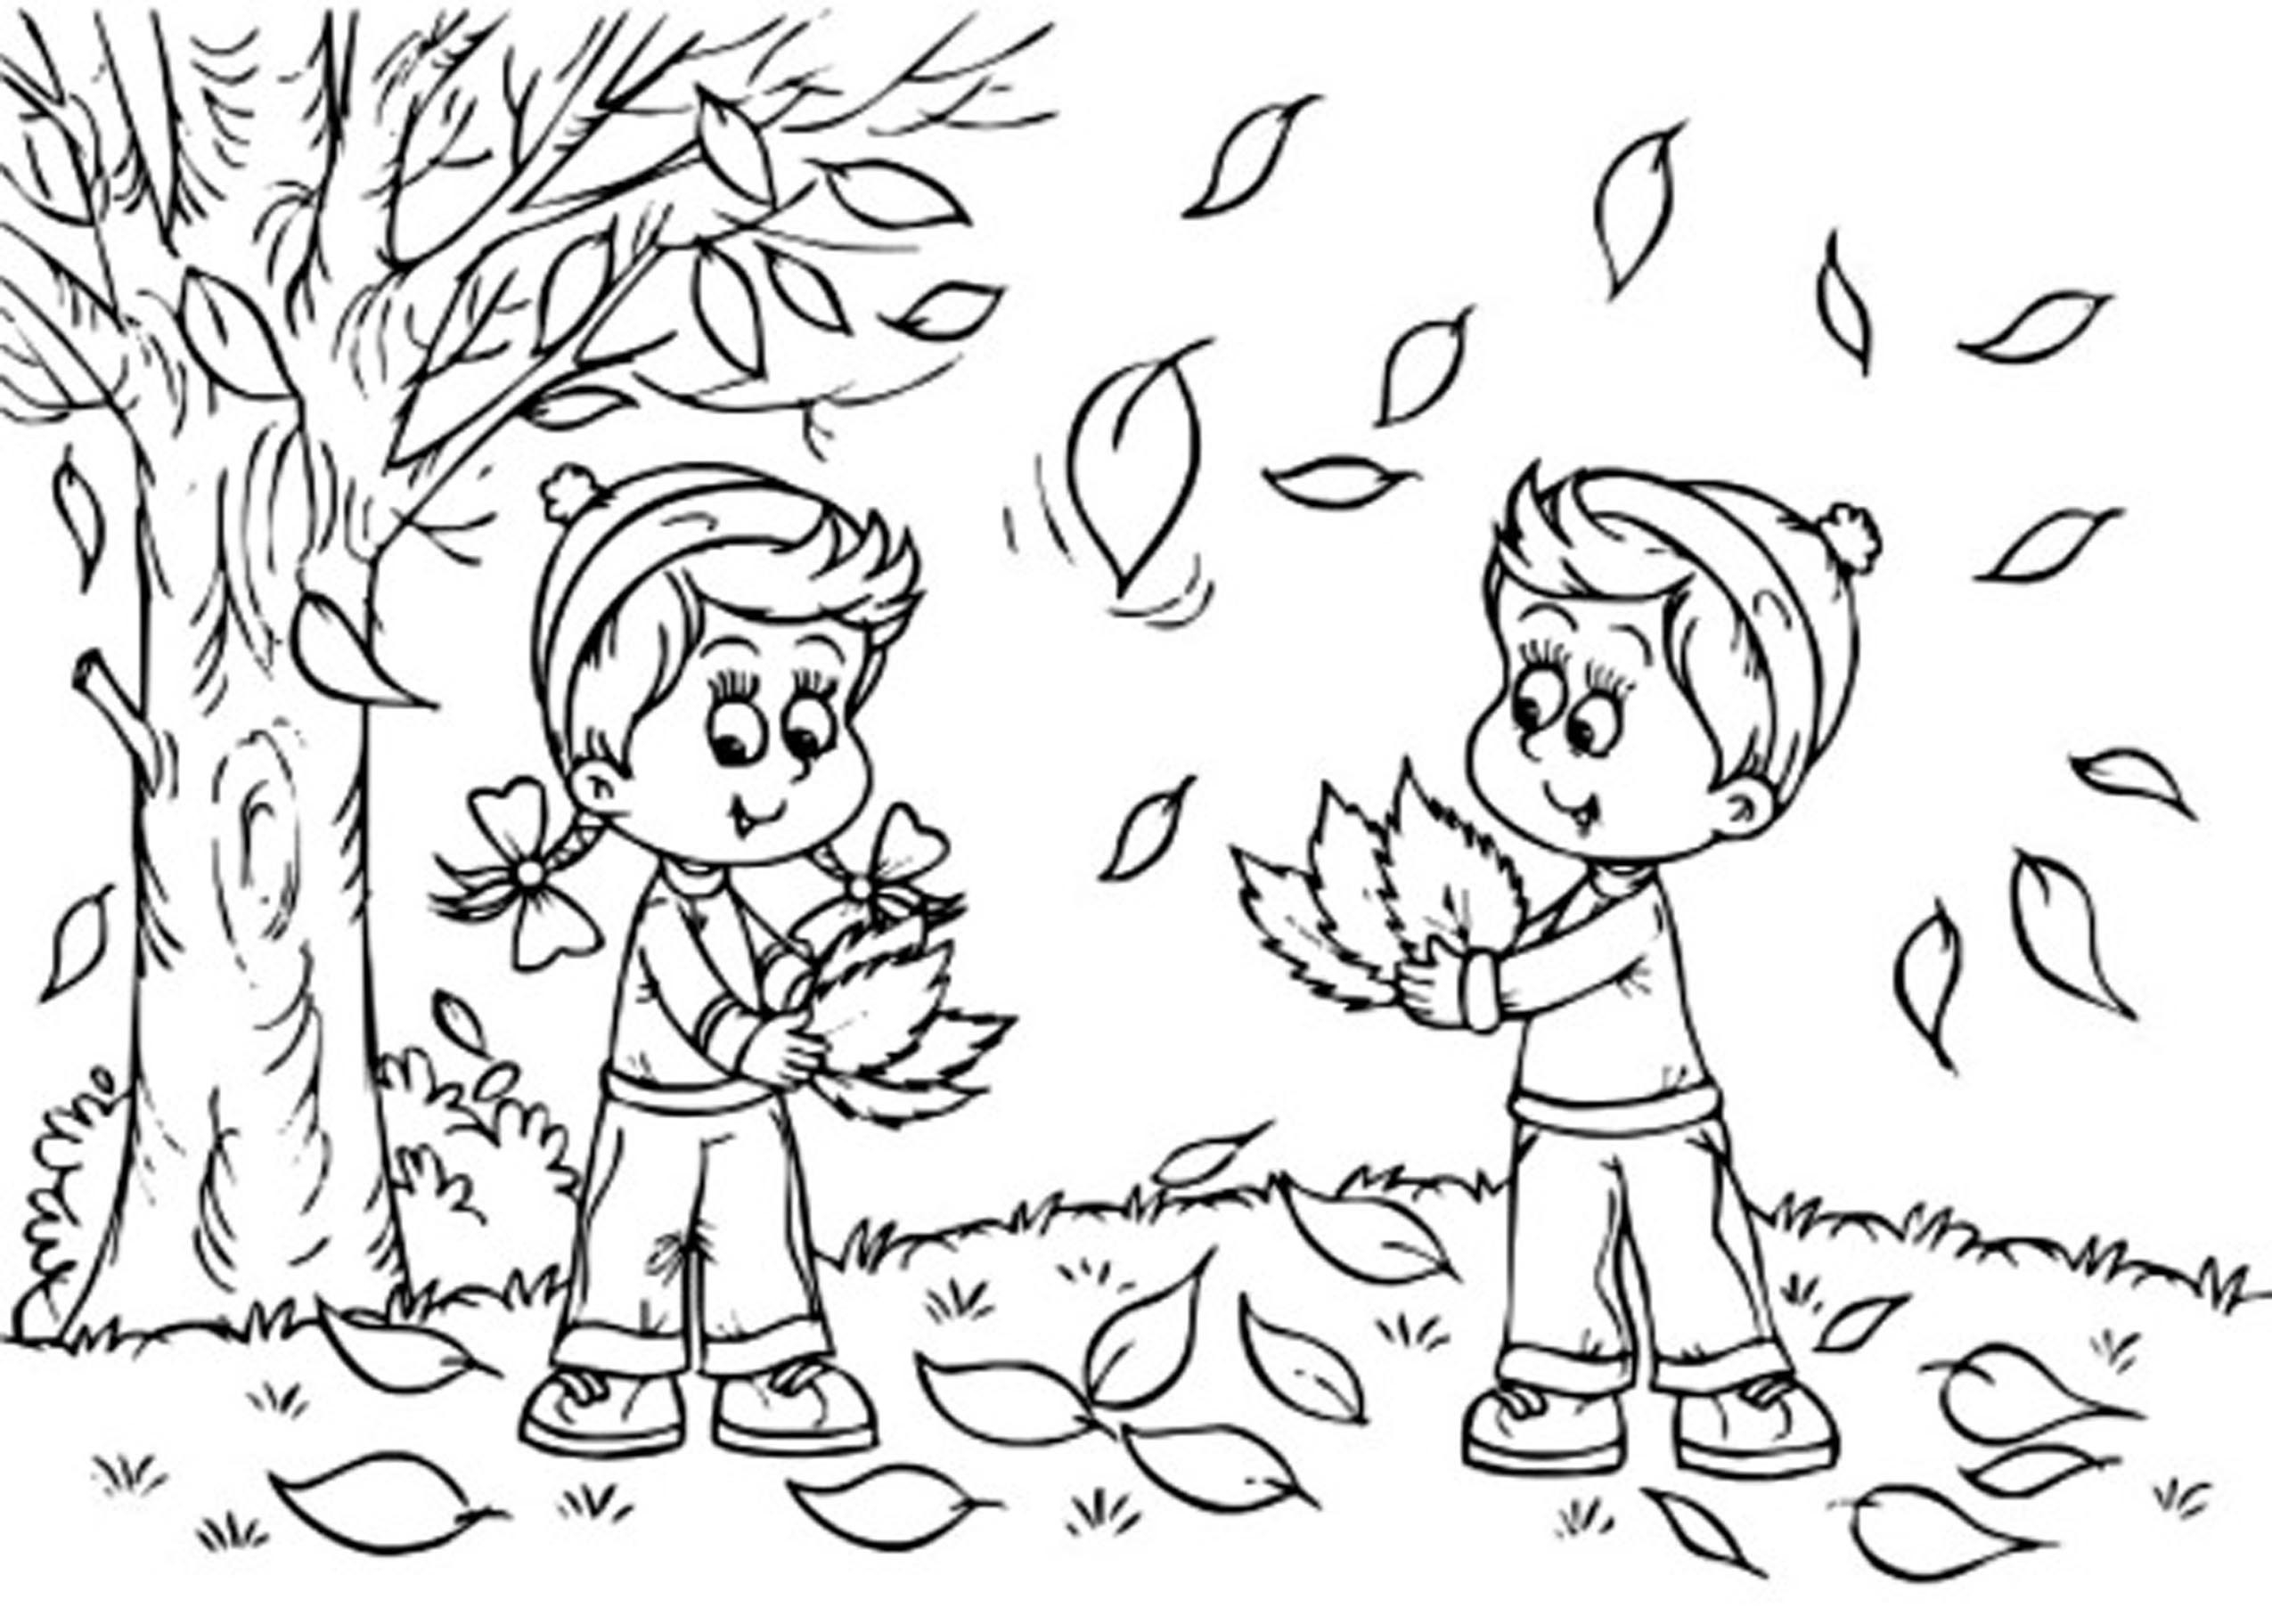 Fall Coloring Page Fall Coloring Pages For Preschoolers Colouring Photos Of Cure Autumn